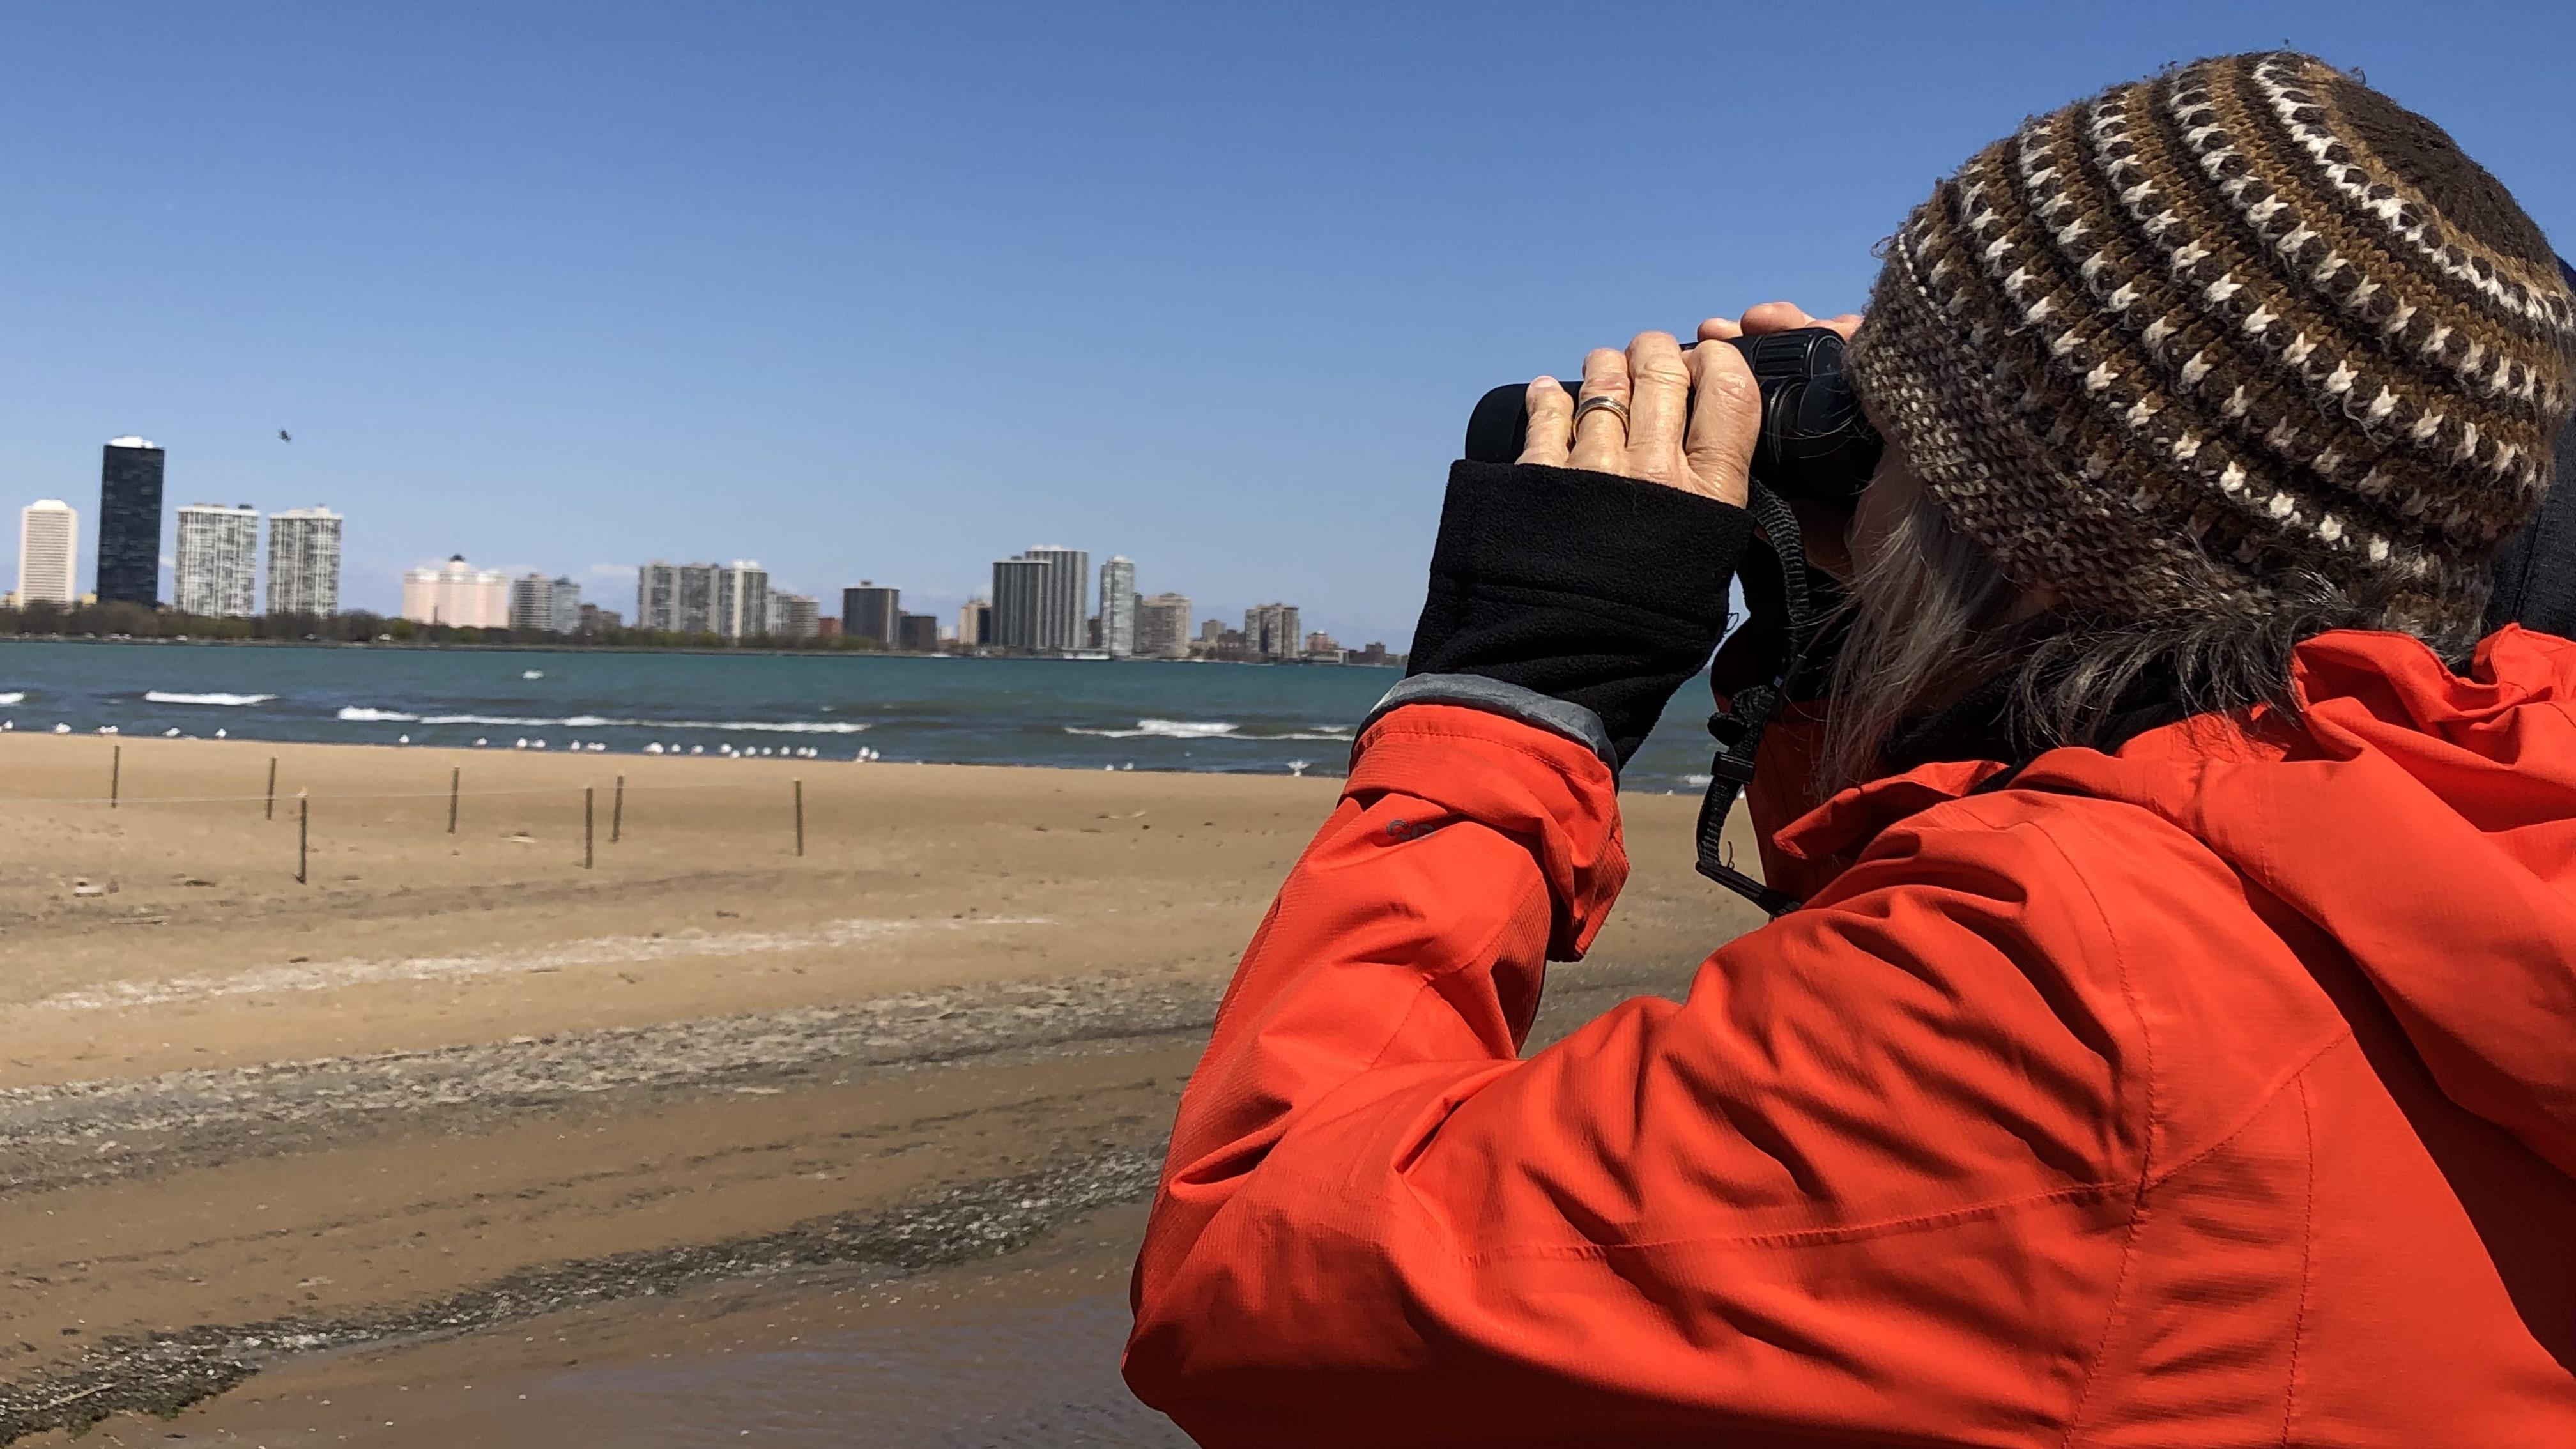 Birders use binoculars to scan for Imani from a safe, non-intrusive distance. (Patty Wetli / WTTW News)